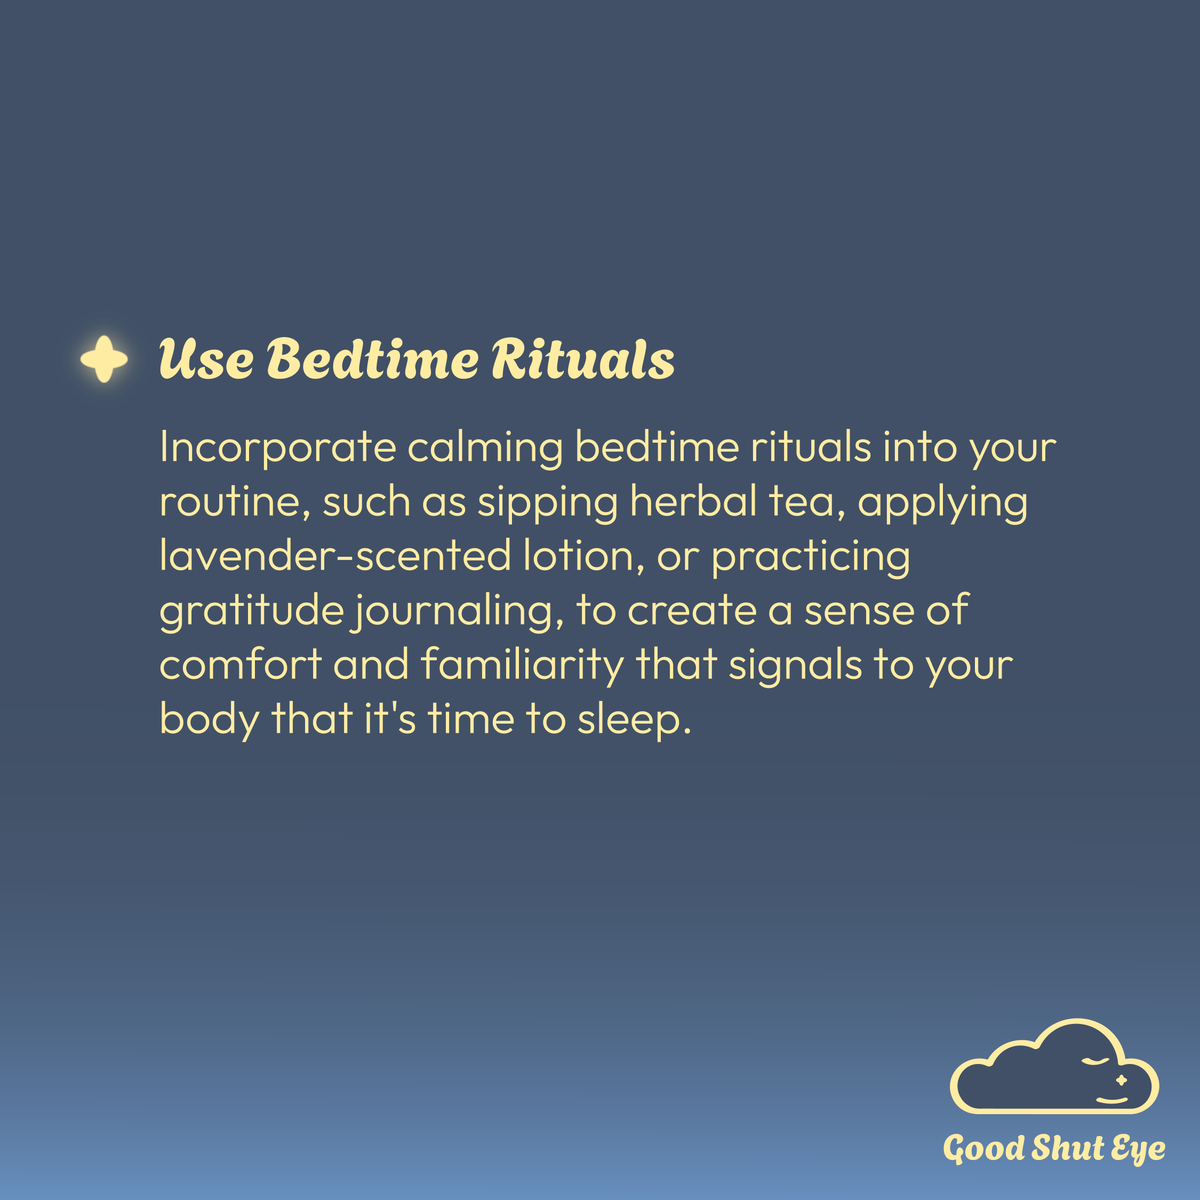 ✨ Create a sleep-friendly environment with these simple tips! 😴 From setting the perfect temperature to banishing distractions, these tips are key to getting the rest you deserve. 💤 #SleepEnvironment #HealthySleepHabits  #BetterSleep #SleepHealth #GoodShutEye